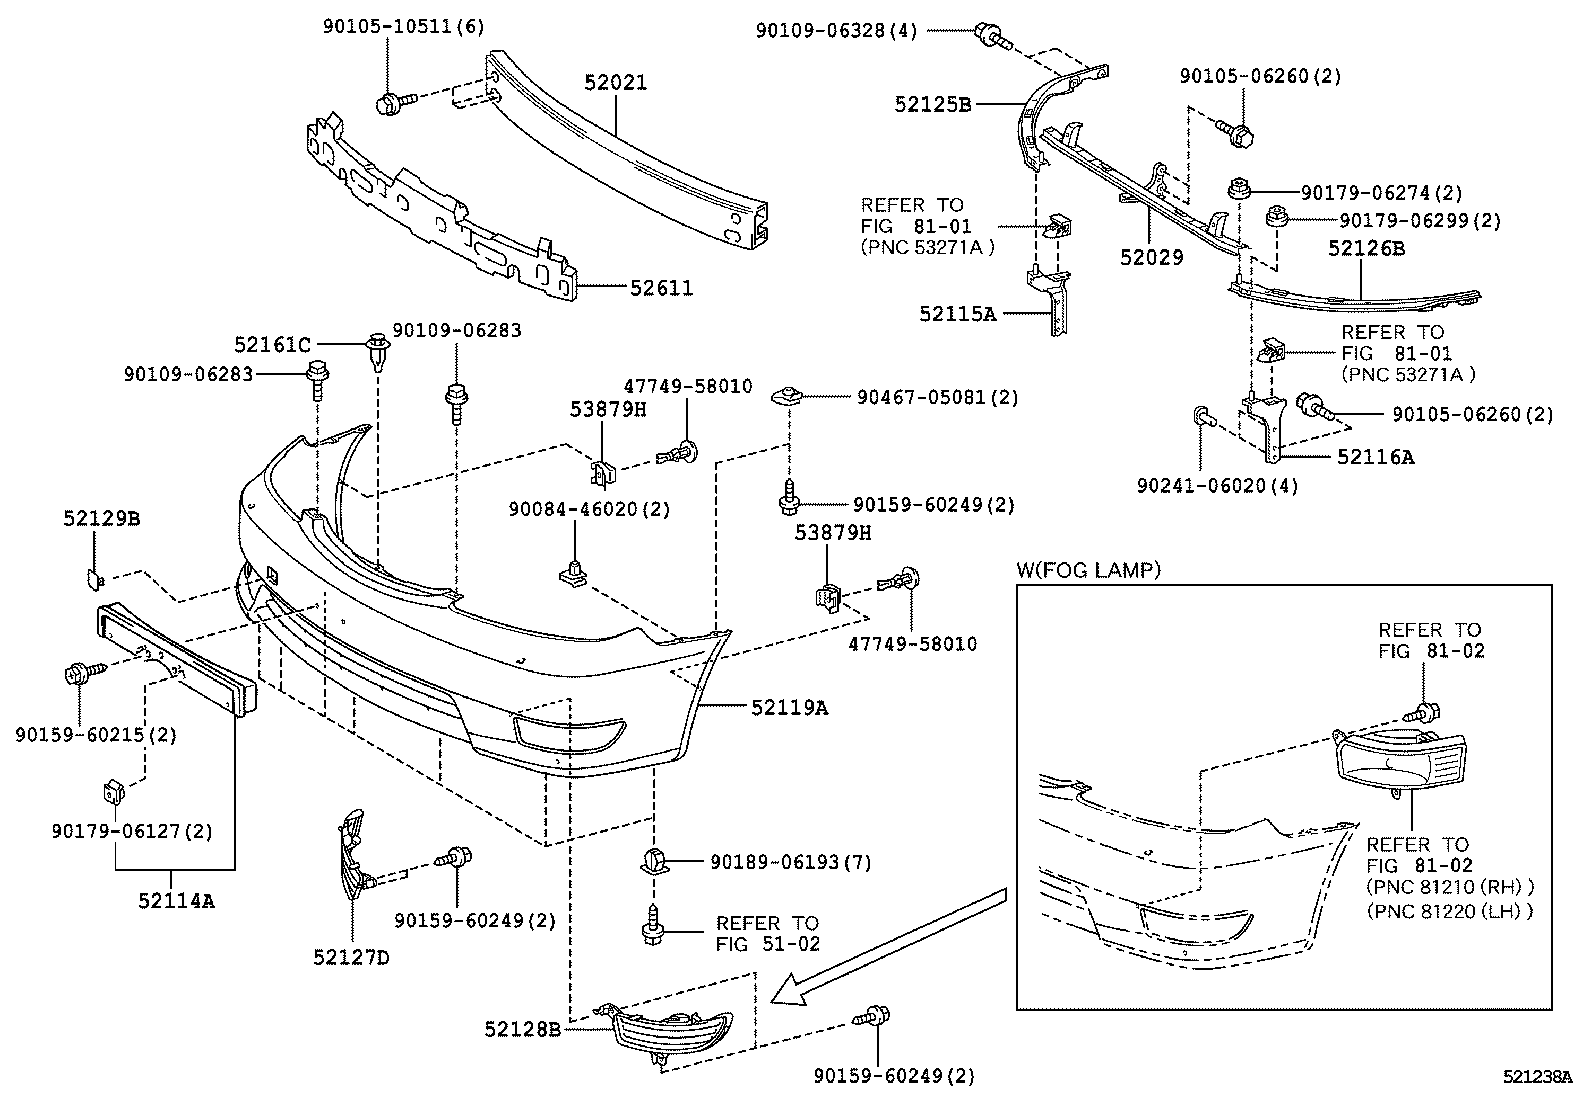 2002 Toyota Camry Front End Parts Diagram